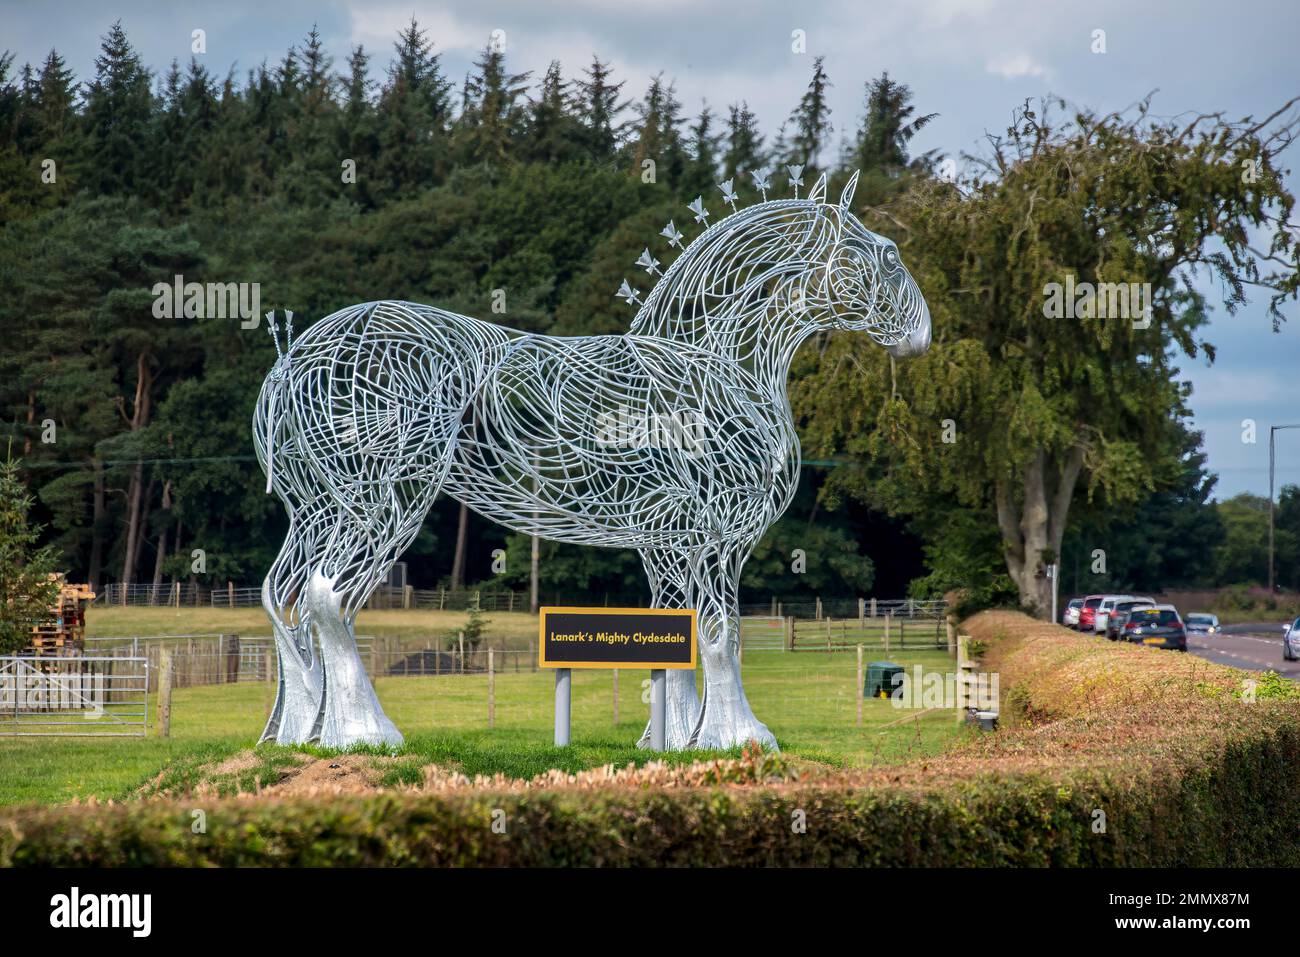 Sculpture of Lanark's Mighty Clydesdale horse close to where breed is from in Lanark, Scotland Stock Photo